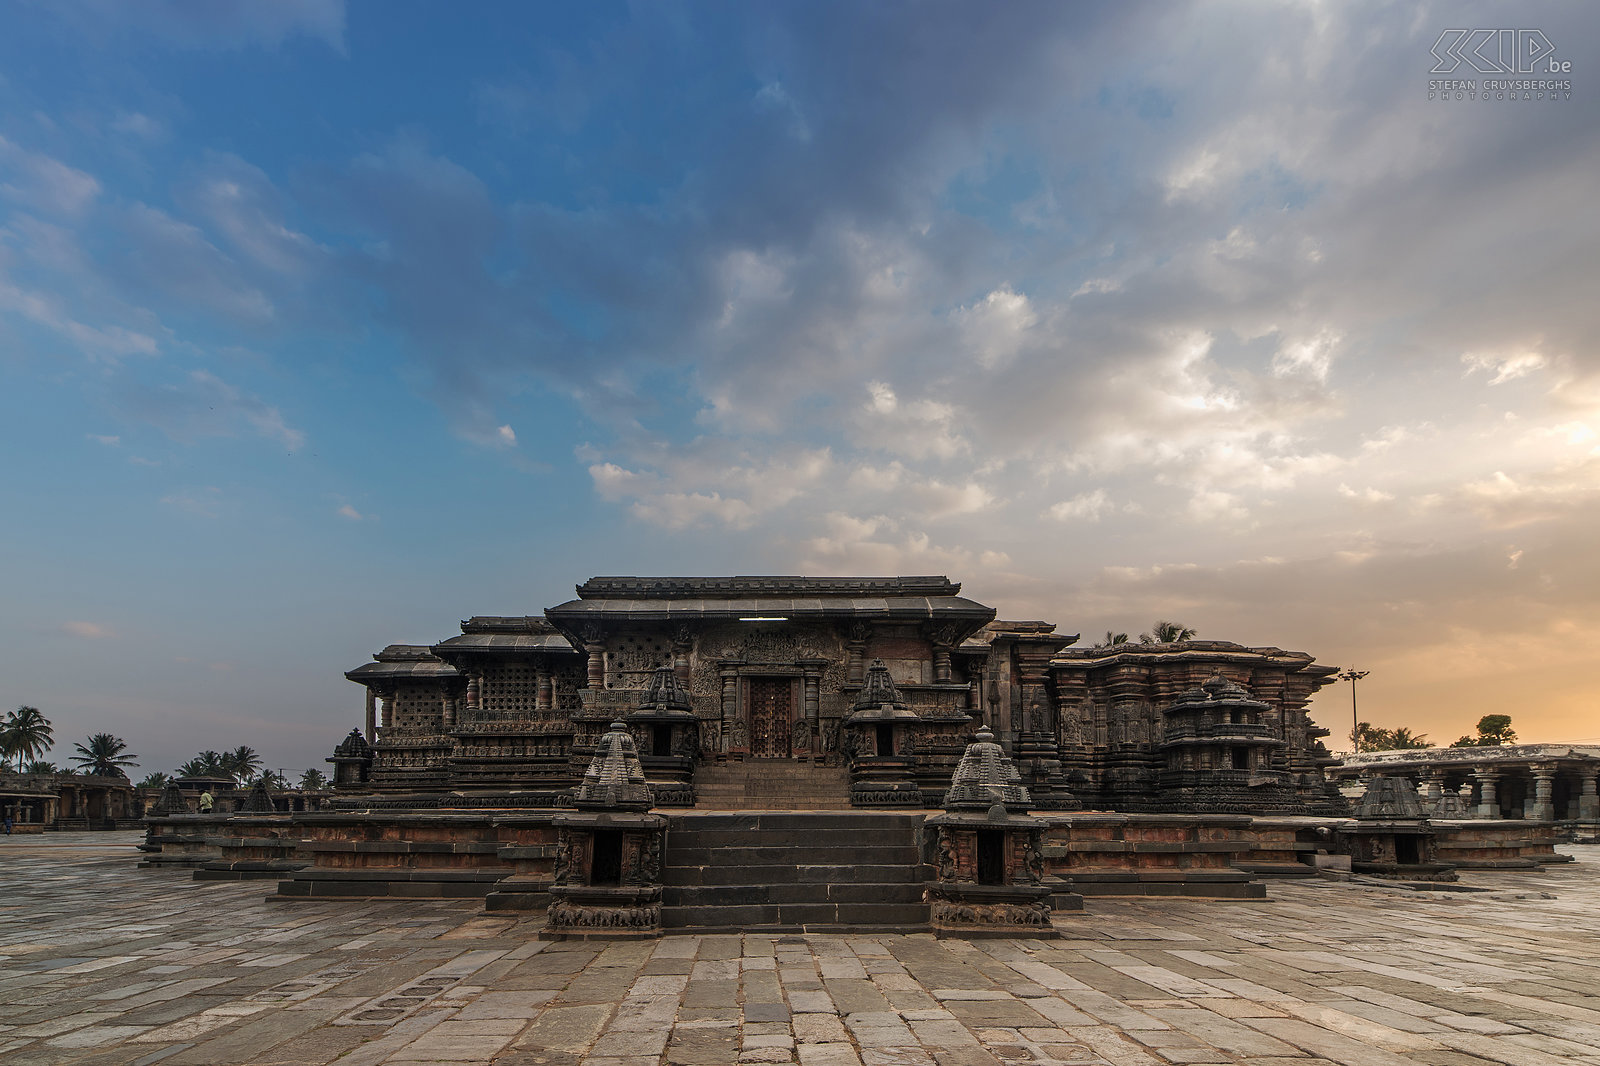 Belur Before Halebidu become the capital of the Hoysala empire, Belur was its capital city. These ancient temples are very well preserved en the complex still has a stunning main temple, several shrines and halls and a water tank. Stefan Cruysberghs